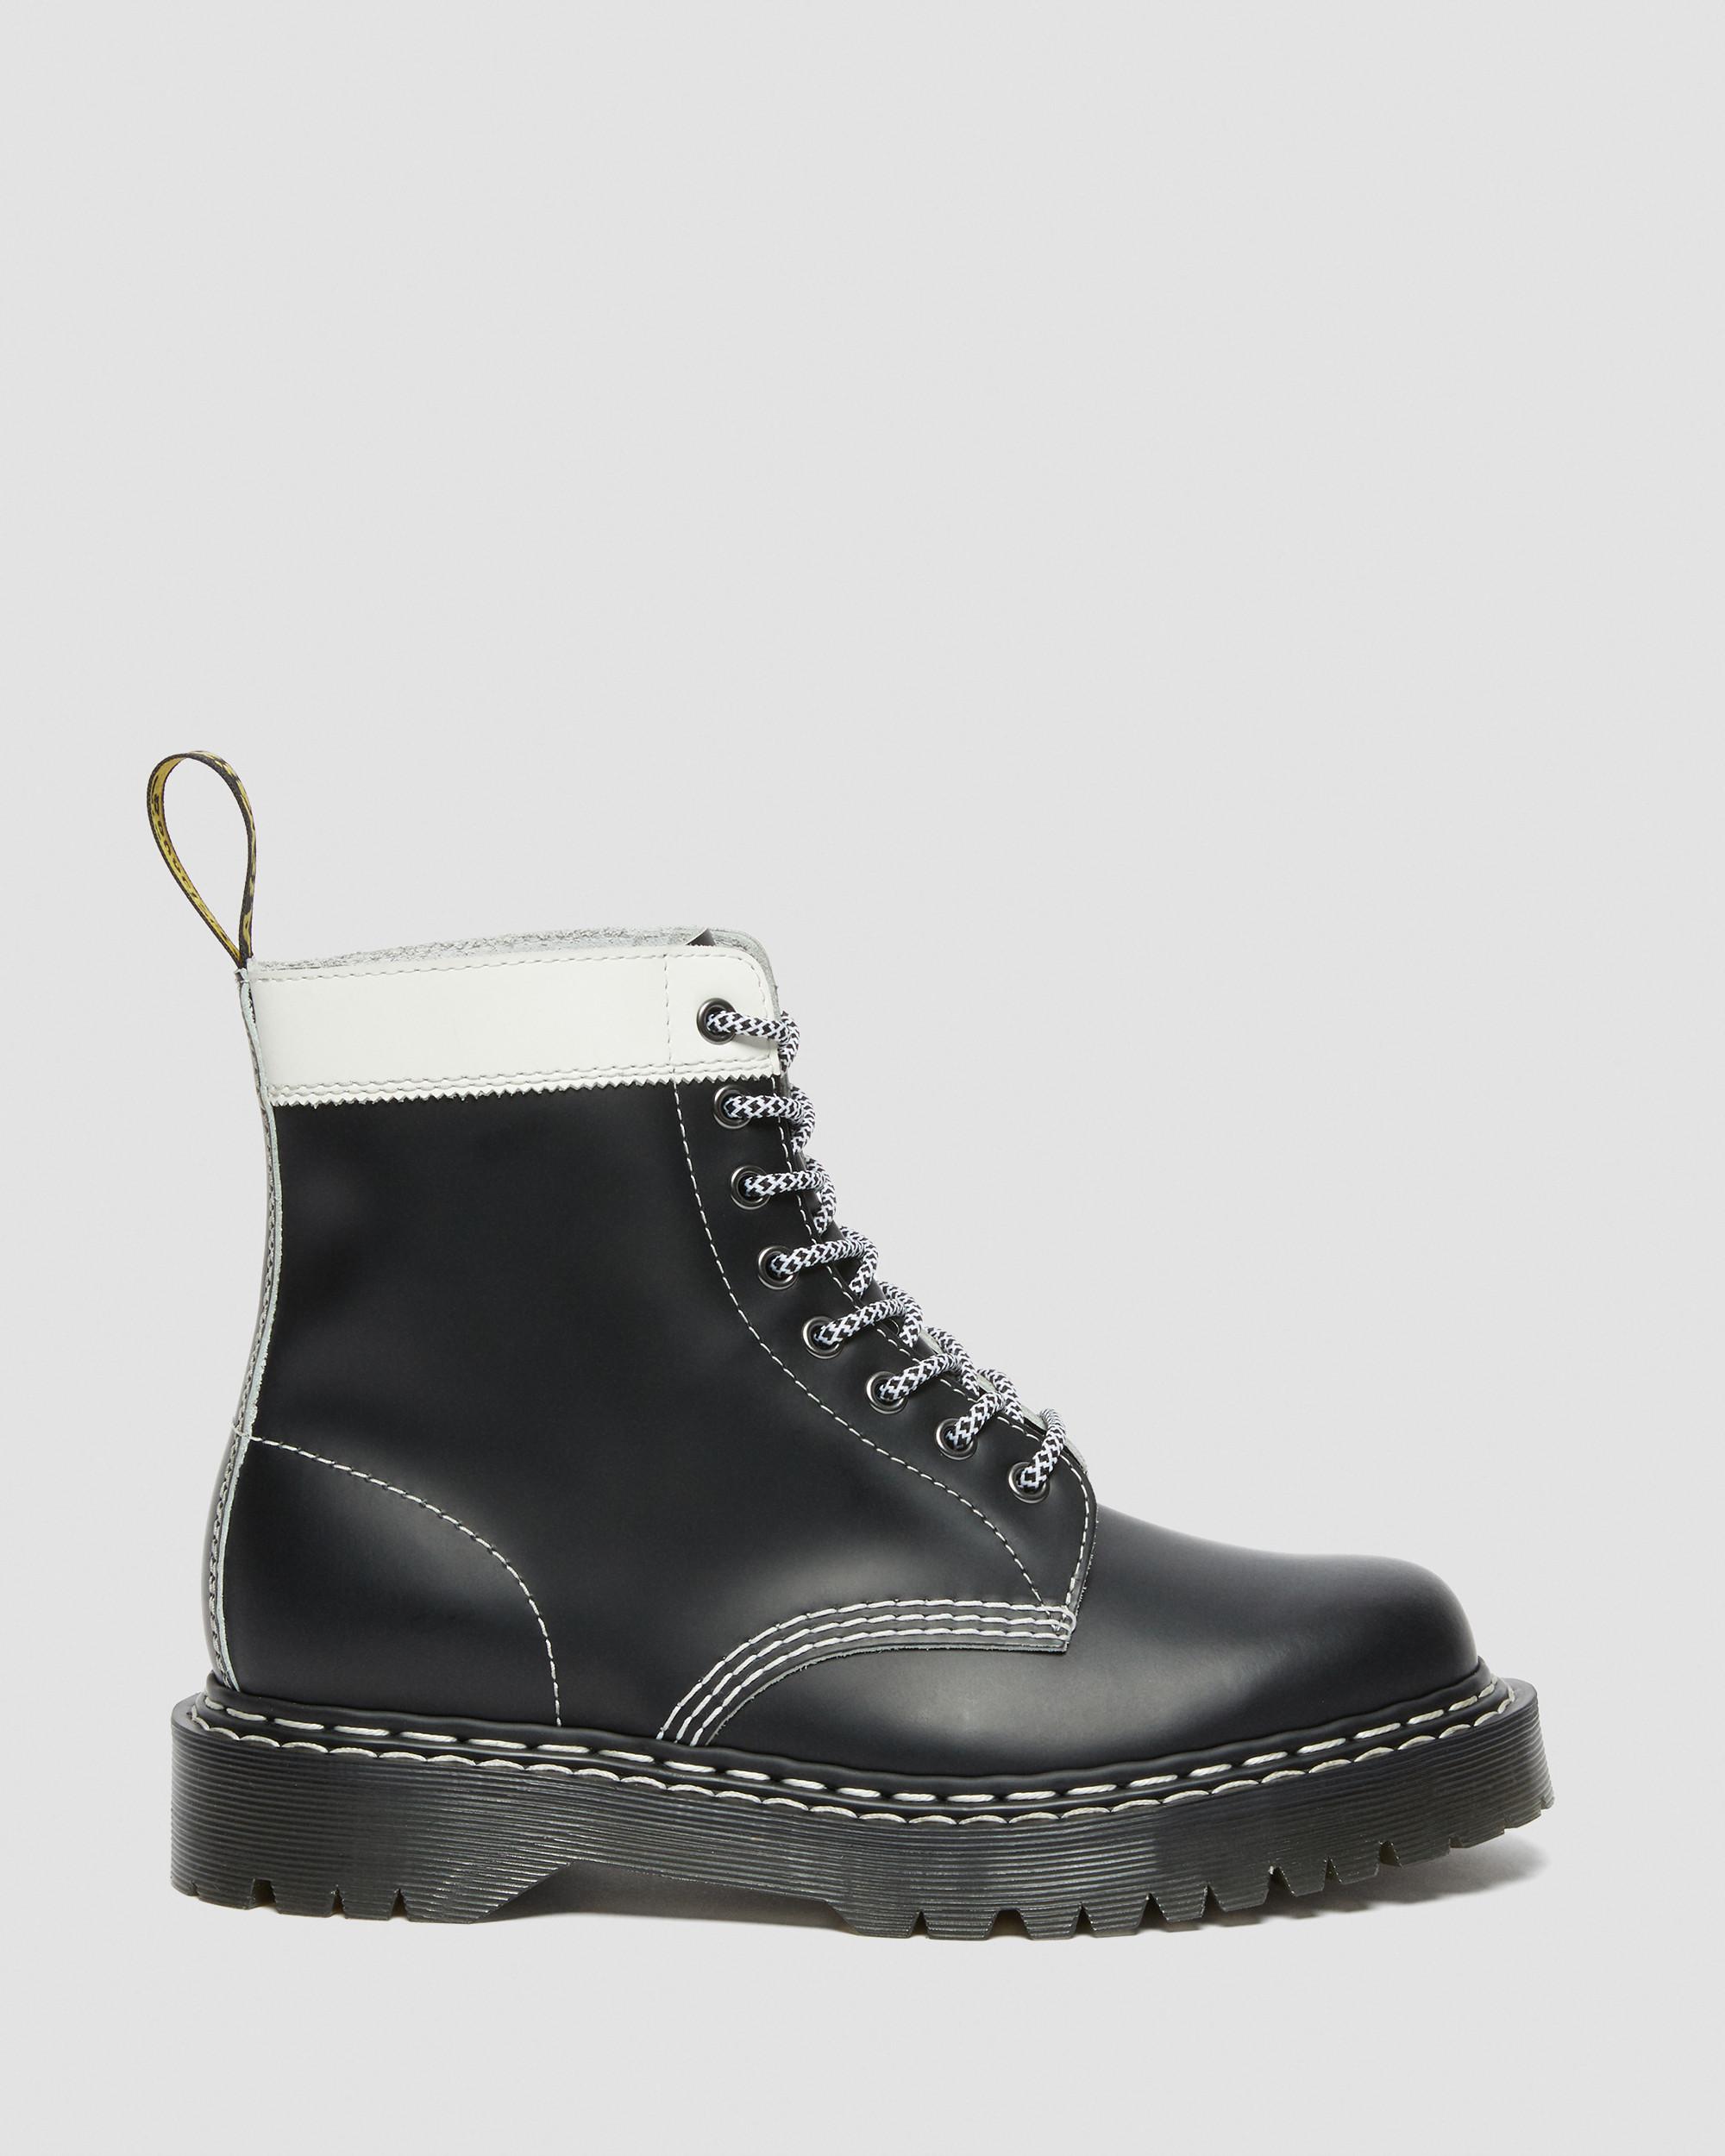 1460 Pascal Bex Leather Contrast Lace Up Boots in Black+White